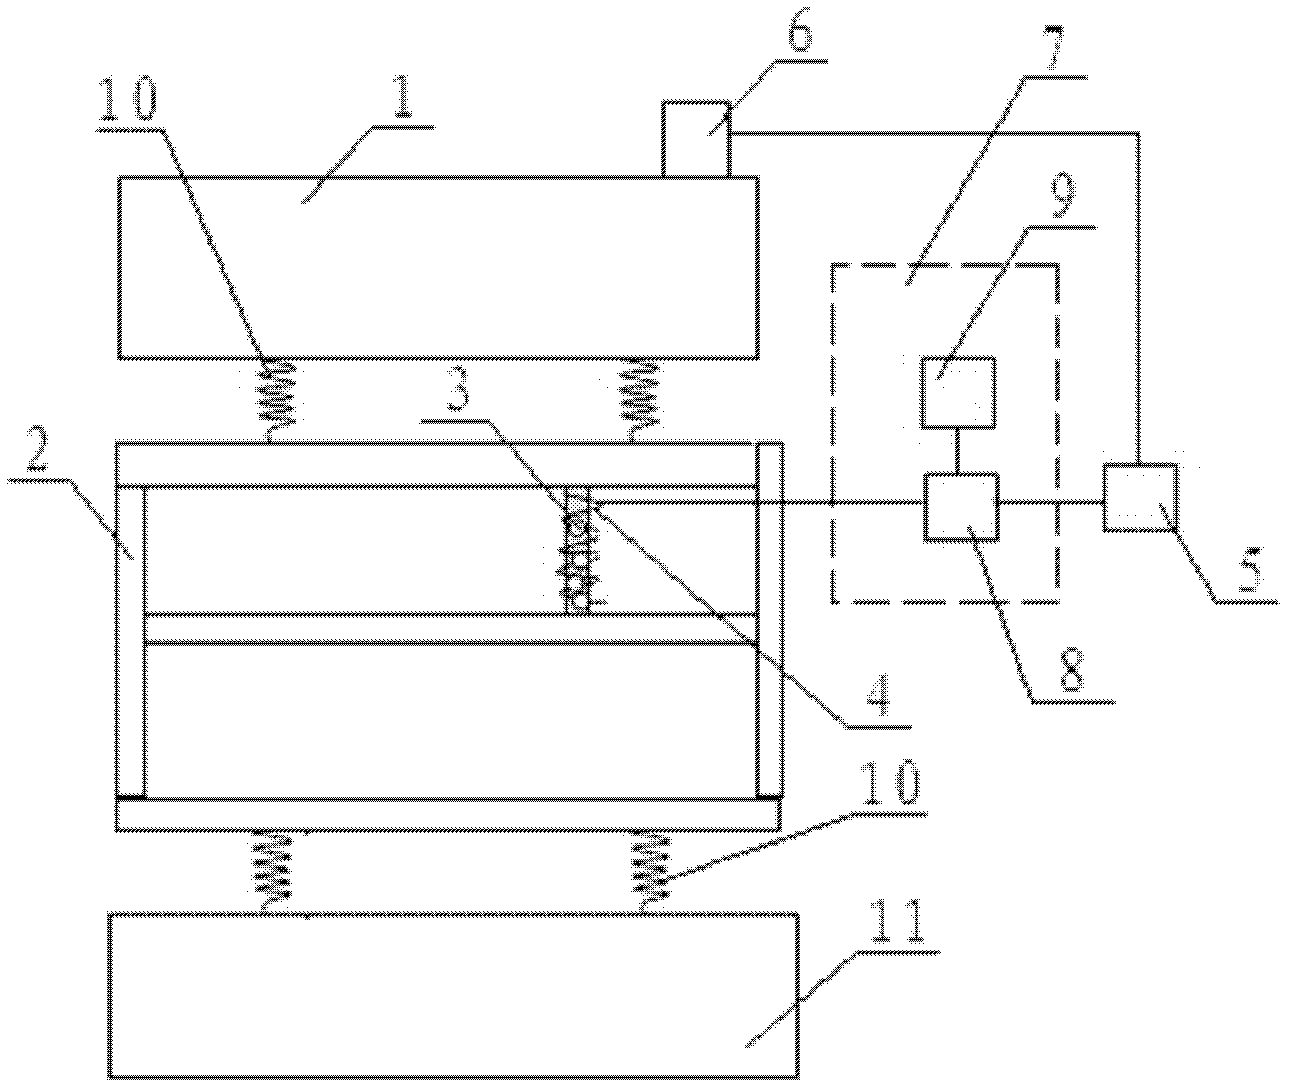 Semi-active particle vibration damping device with truss structure